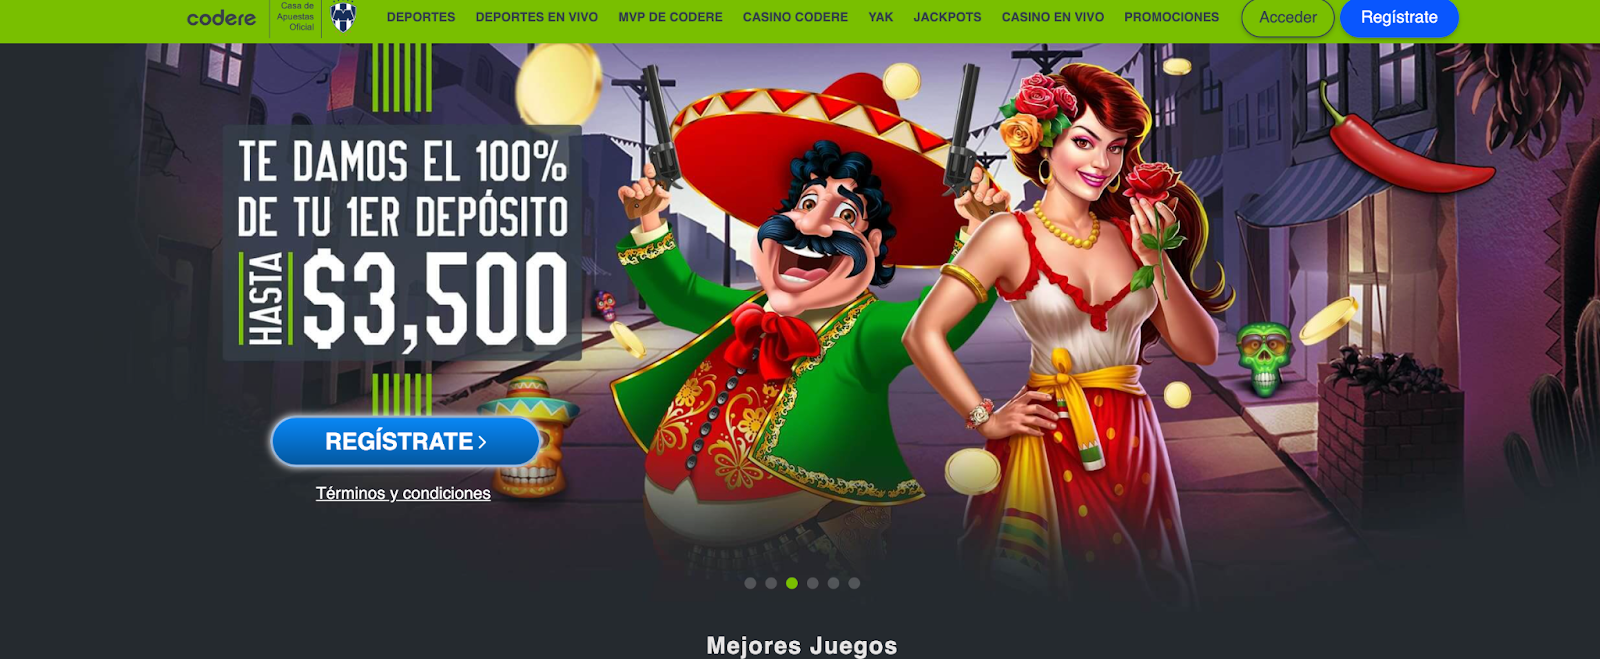 Landing page image of Codere Sportsbook Mexico